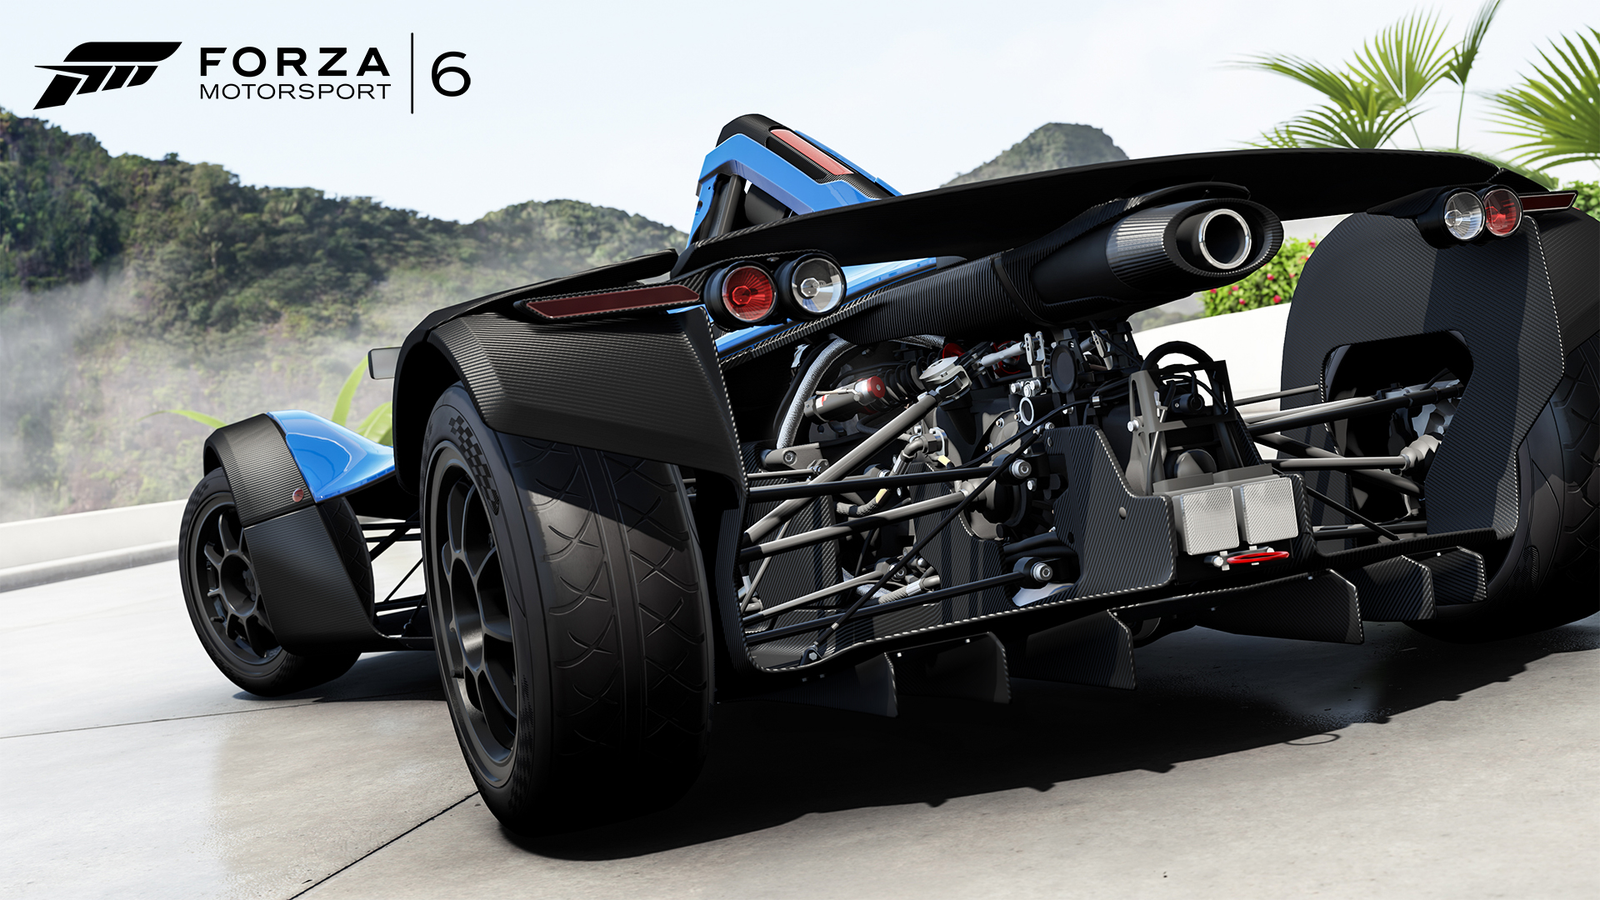 Forza Motorsport 6 Has Gone Gold! Demo Arrives Sept. 1 - Xbox Wire